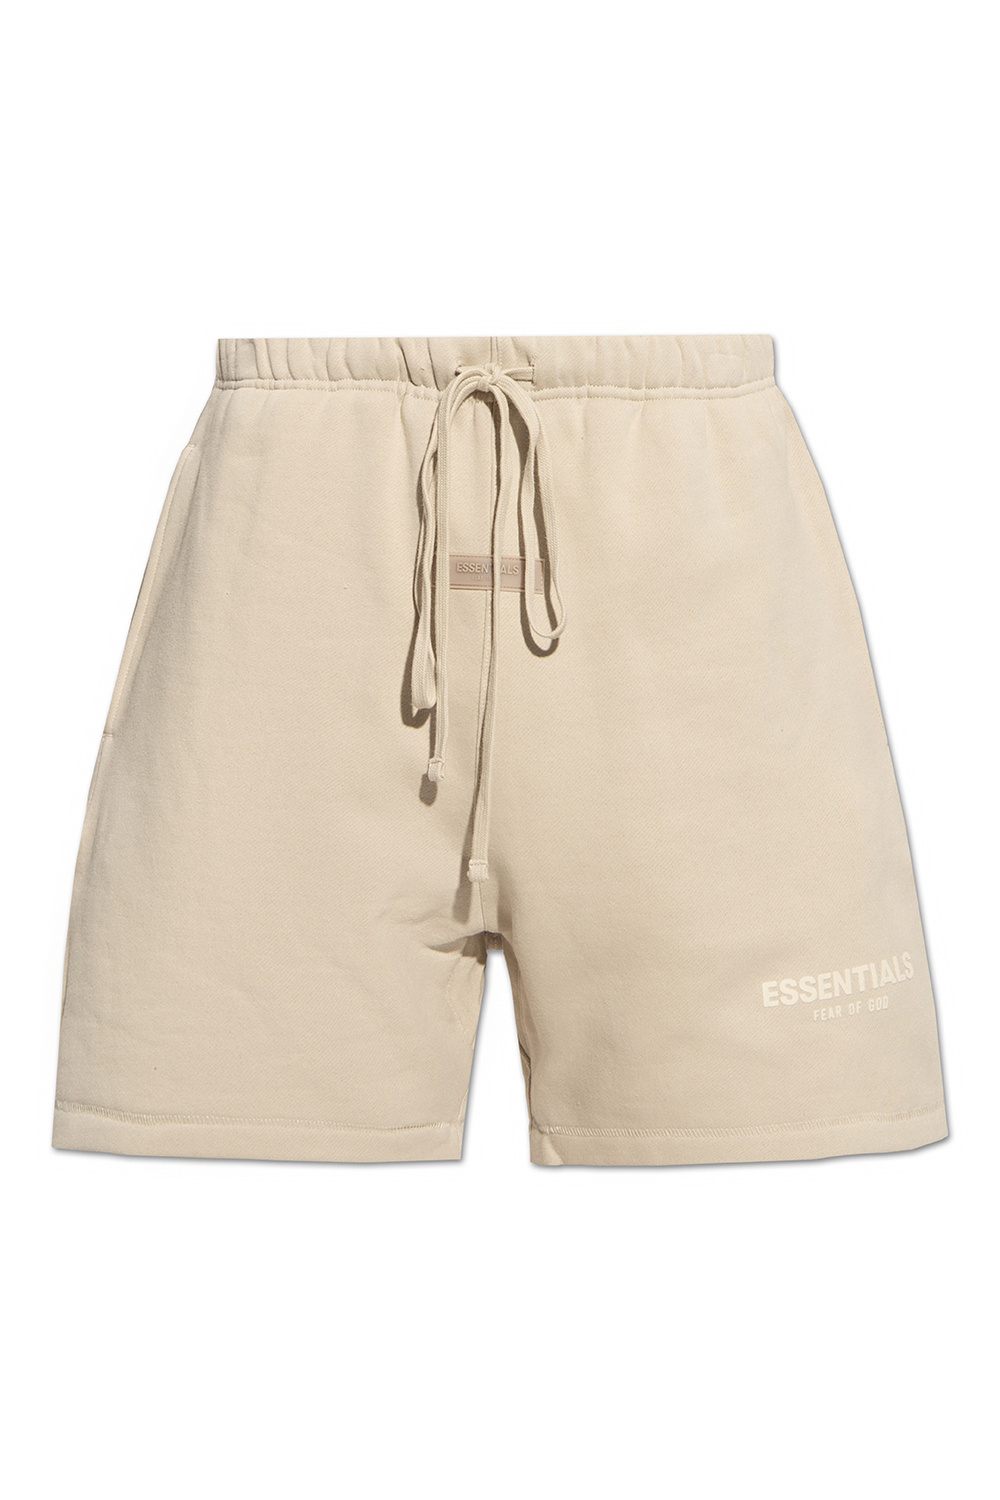 Tan Cotton Shorts by Fear of God ESSENTIALS on Sale